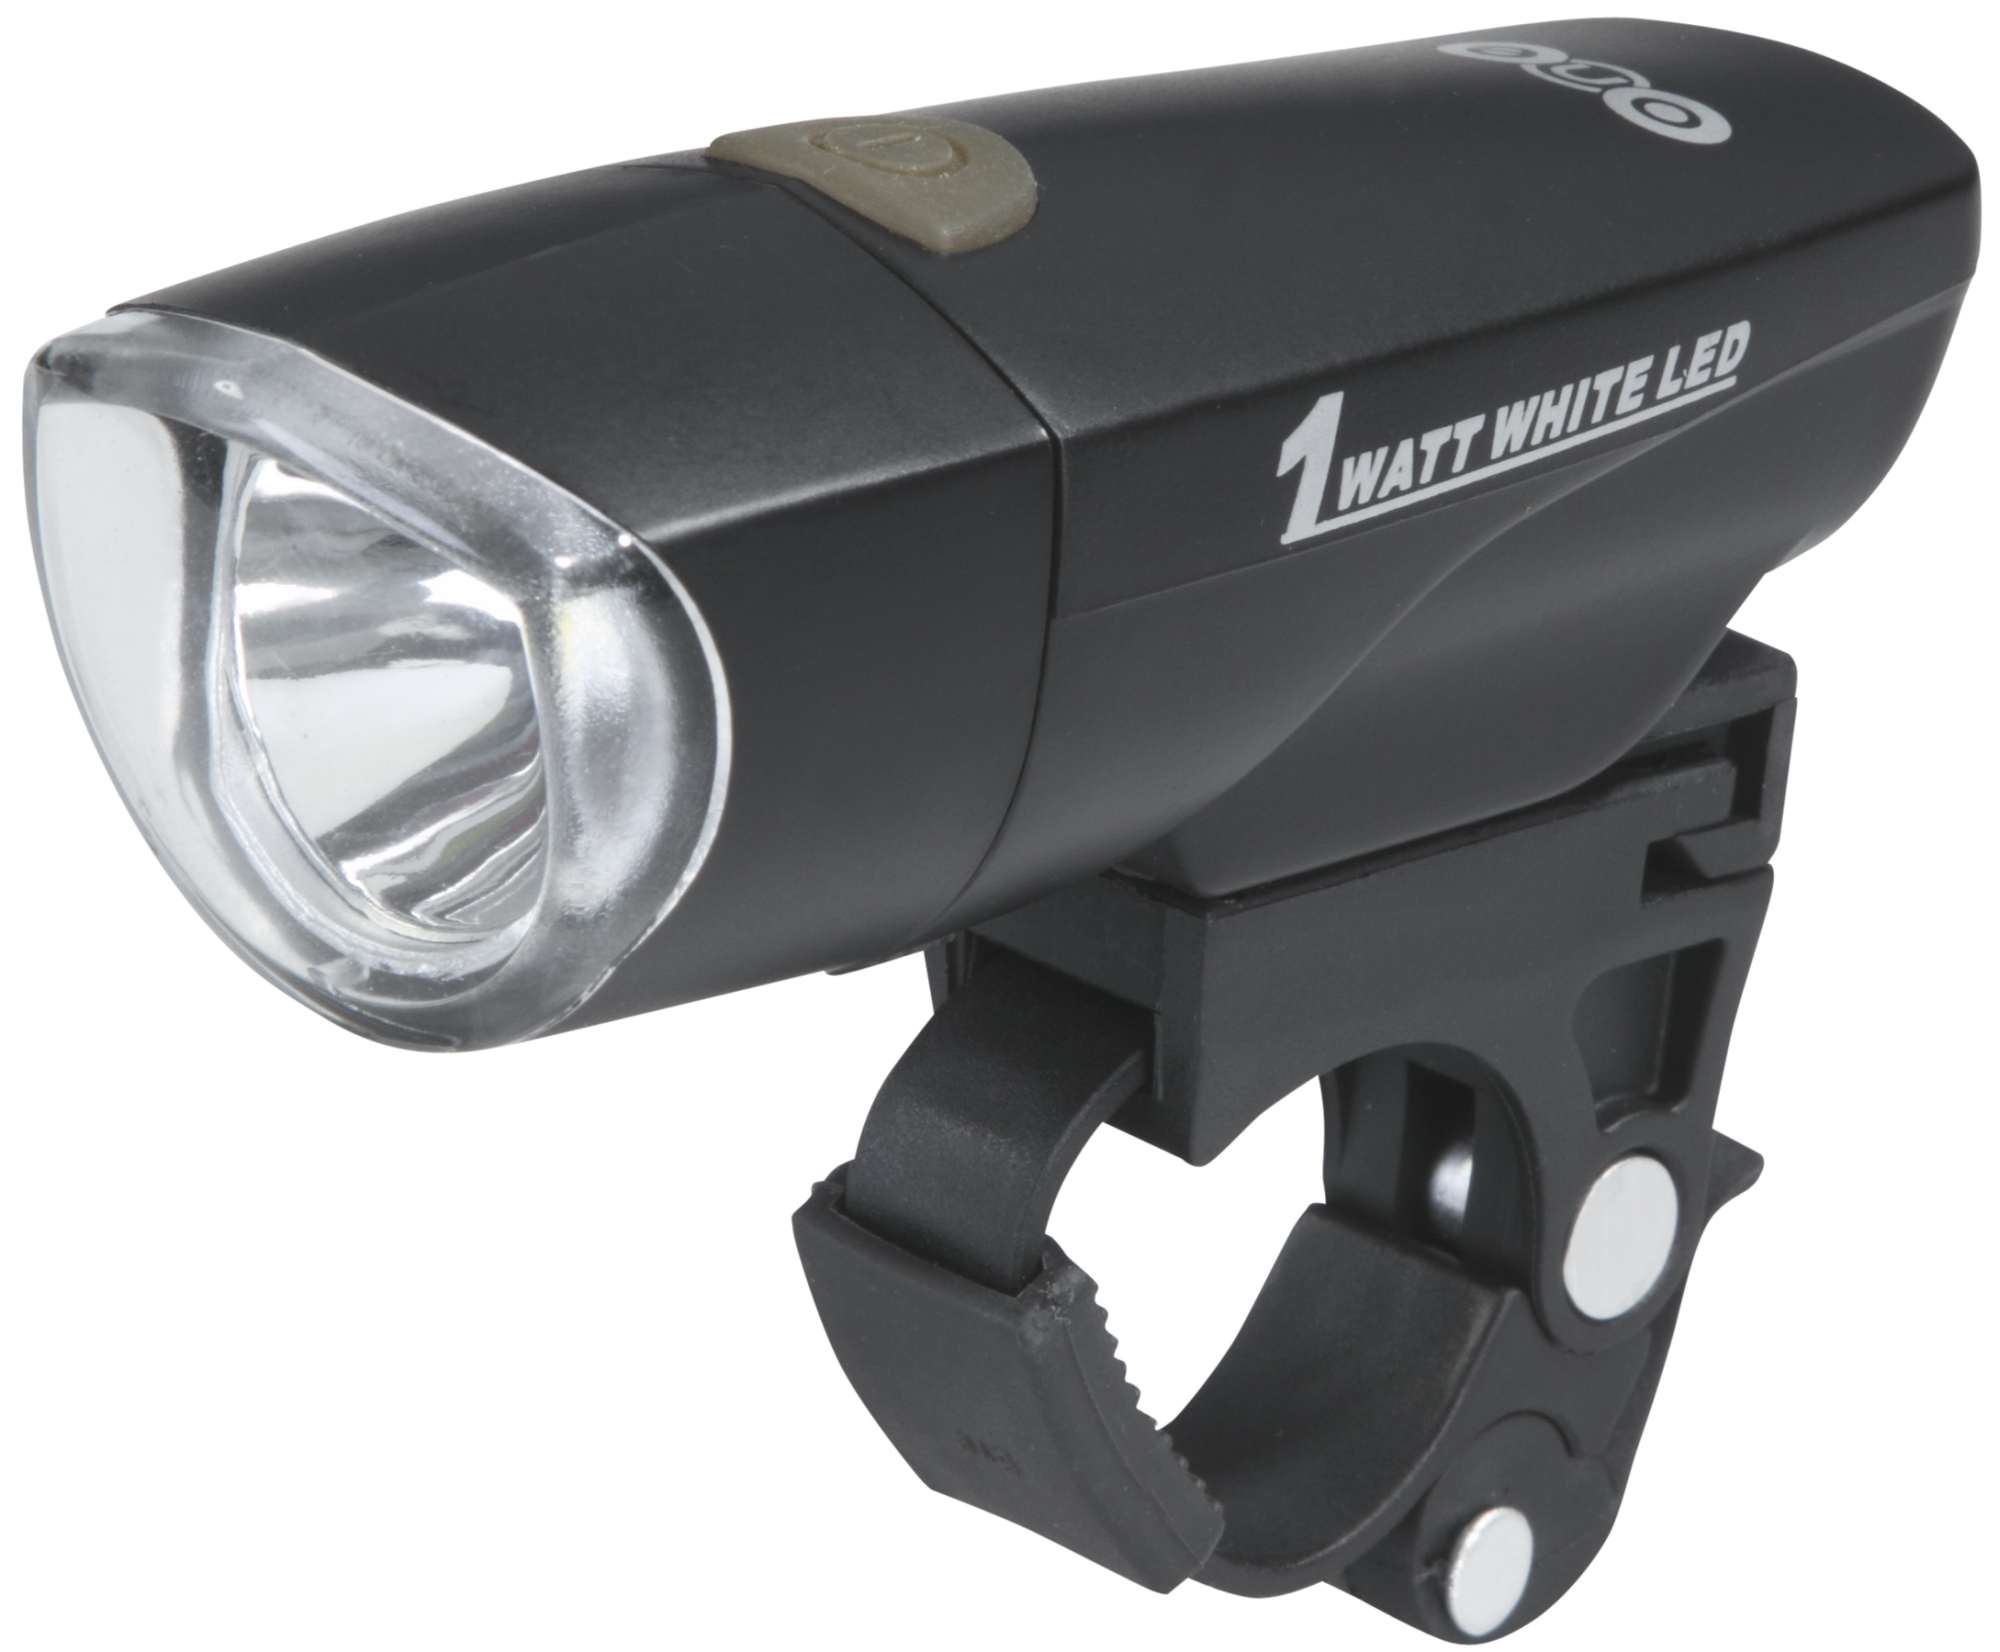 VISION 5.0 - Front bicycle light